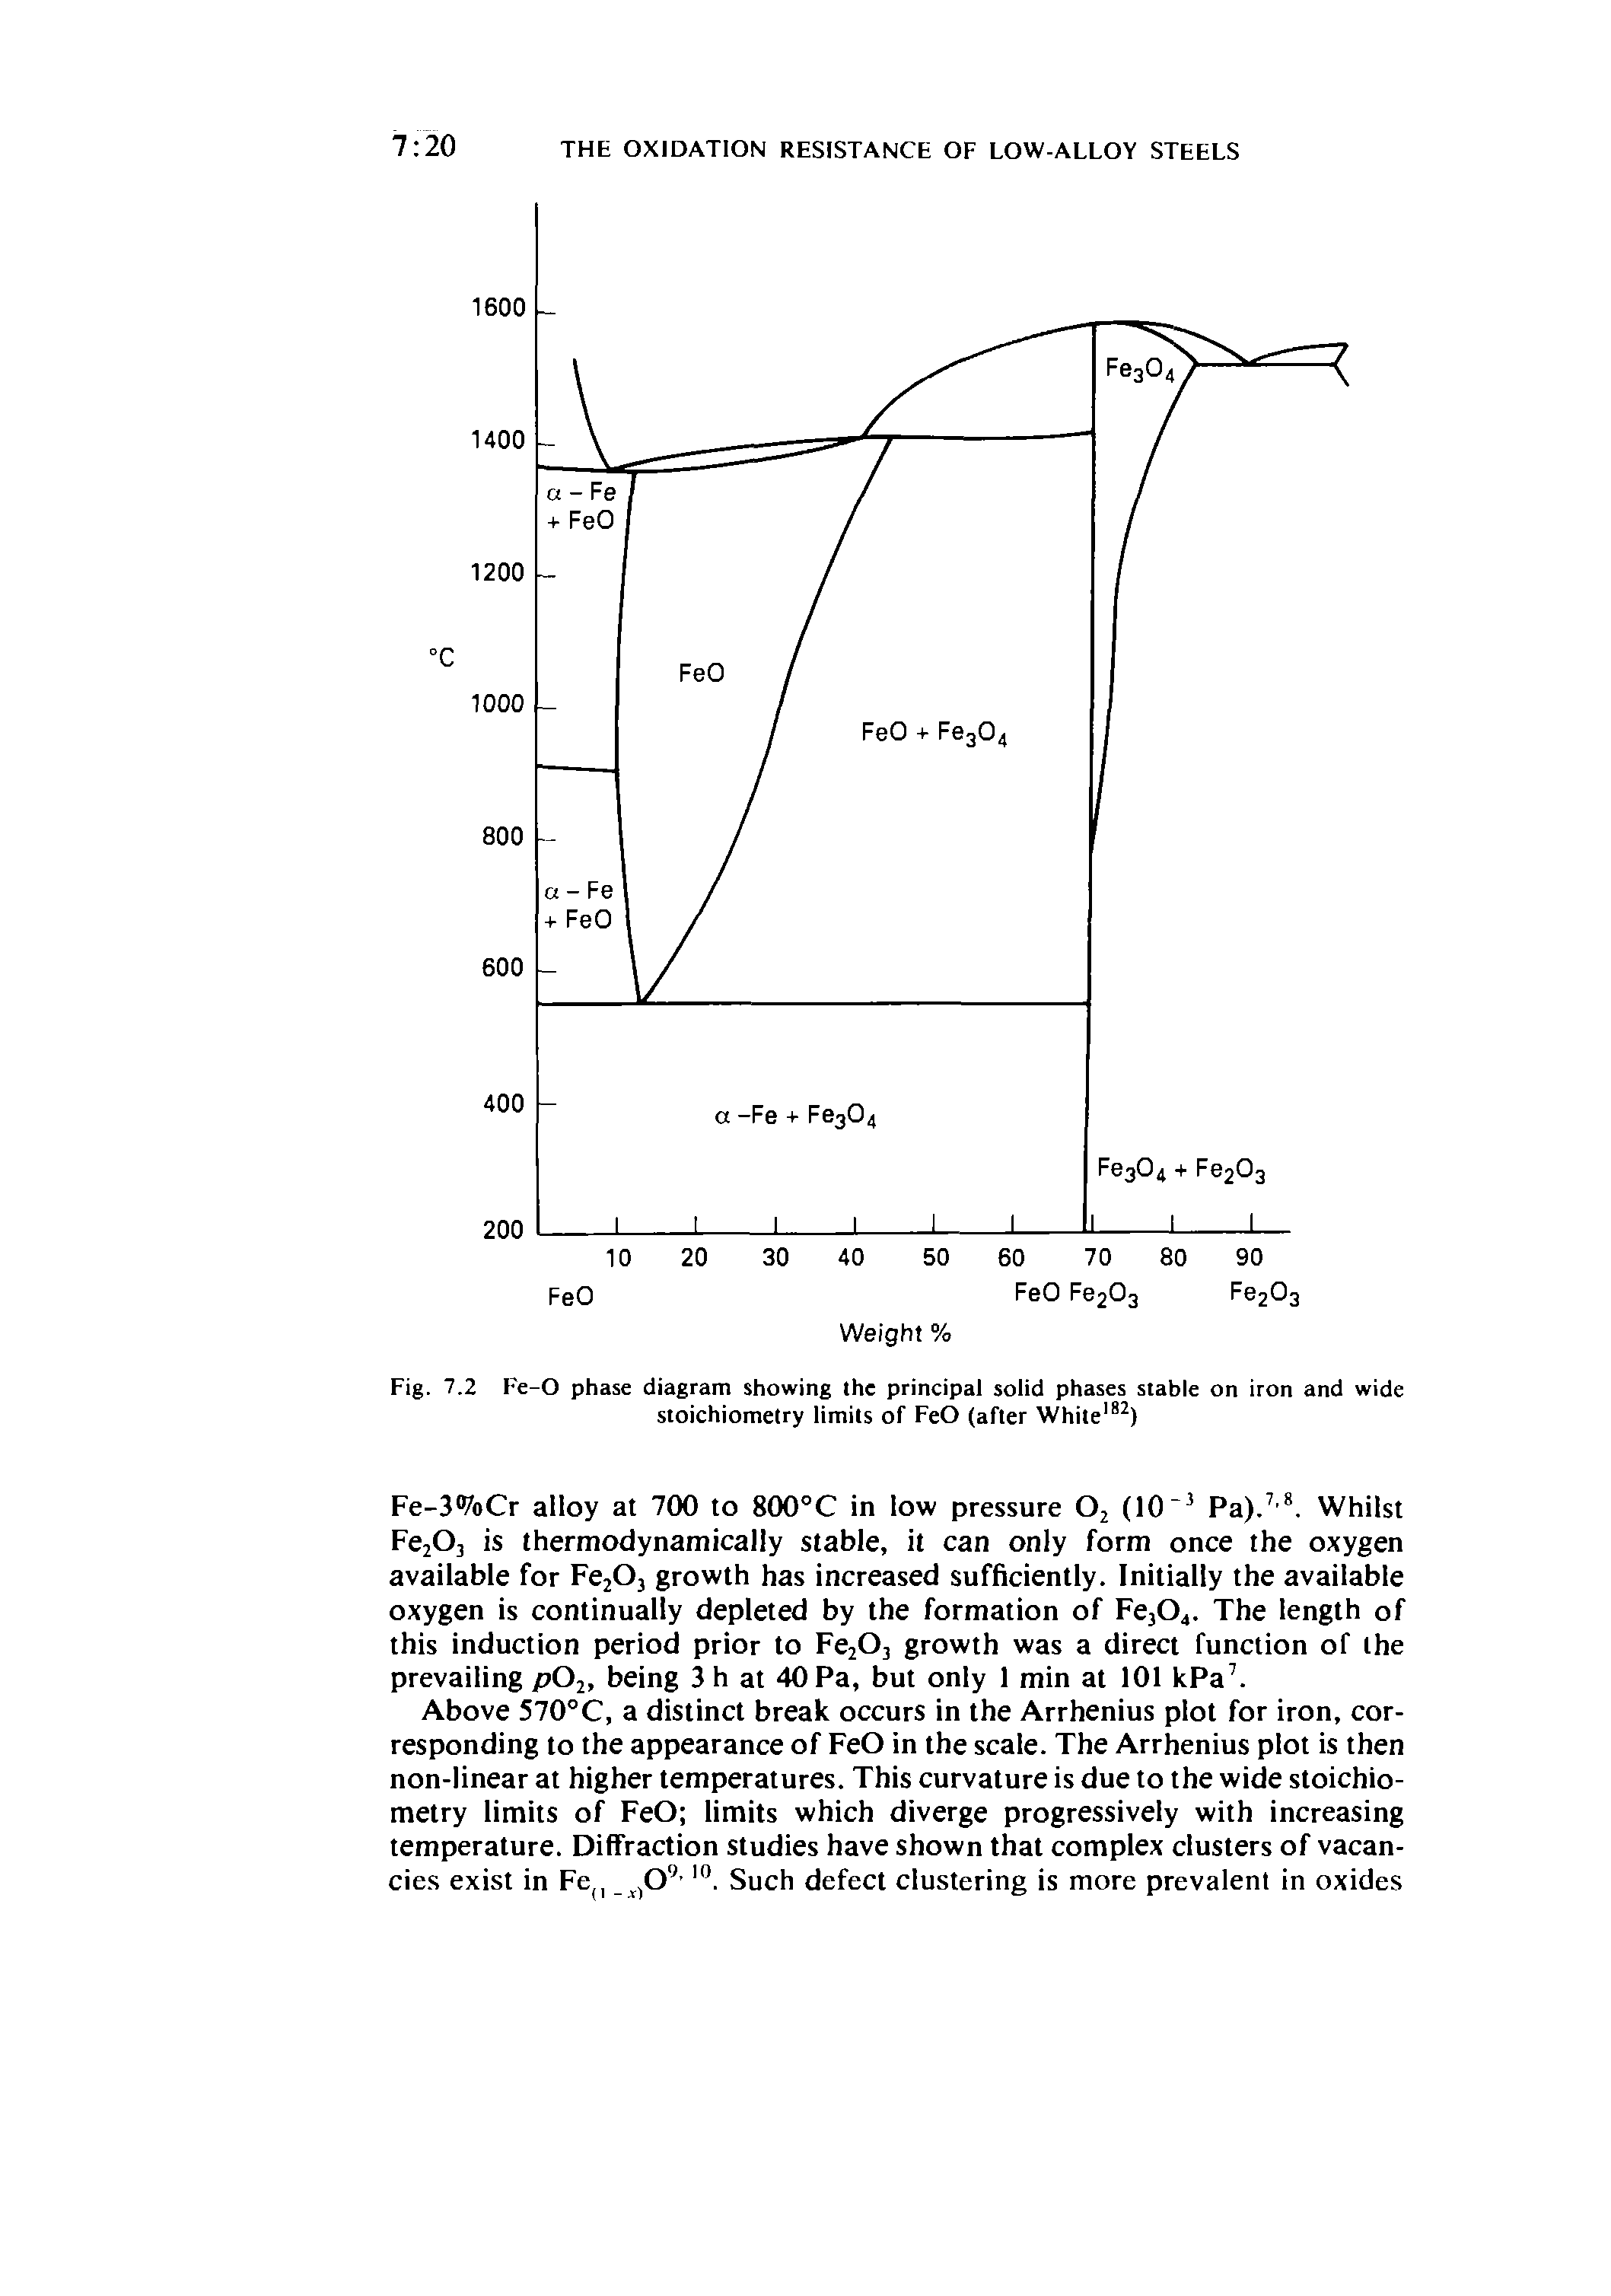 Fig. 7.2 Fe-O phase diagram showing the principal solid phases stable on iron and wide stoichiometry limits of FeO (after White )...